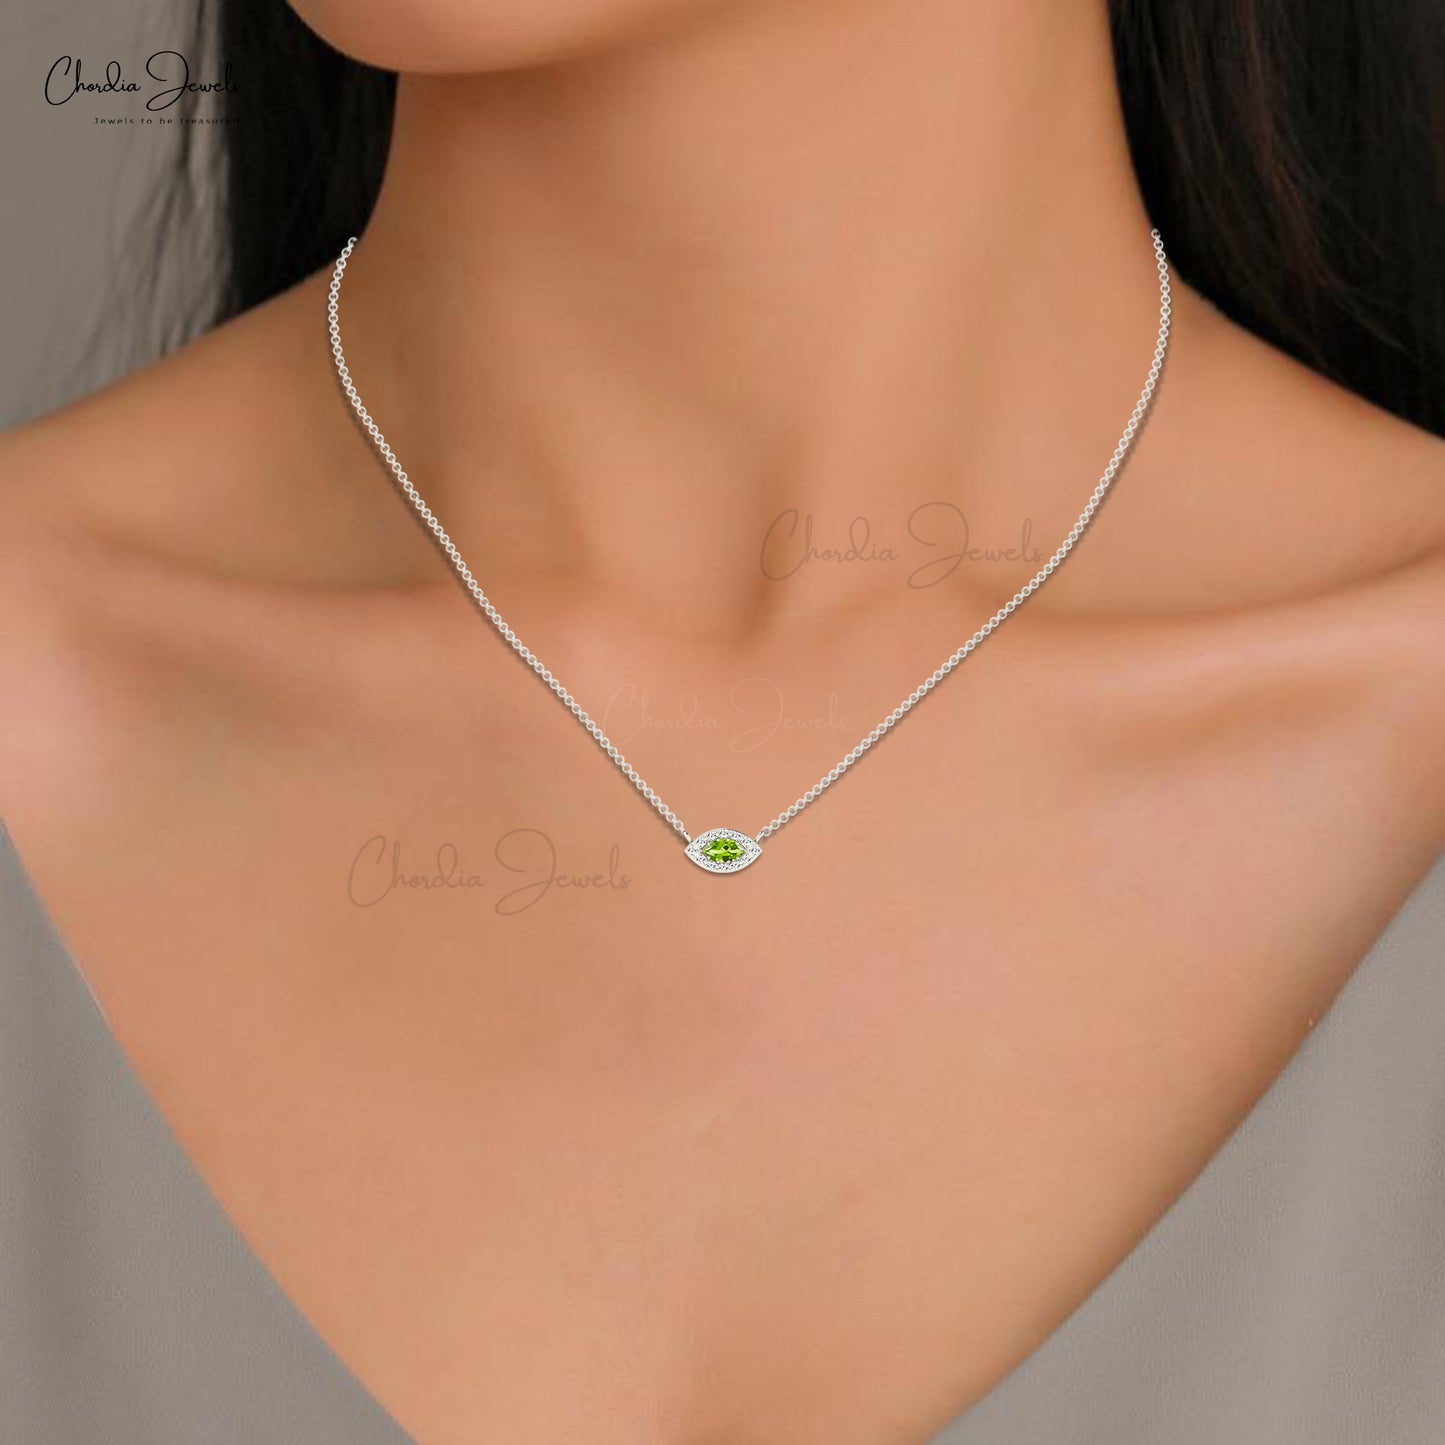 High Quality 14k Solid Gold Halo Necklace Pendant Natural White Diamond and Green Peridot Gemstone Necklace Jewelry For Gift